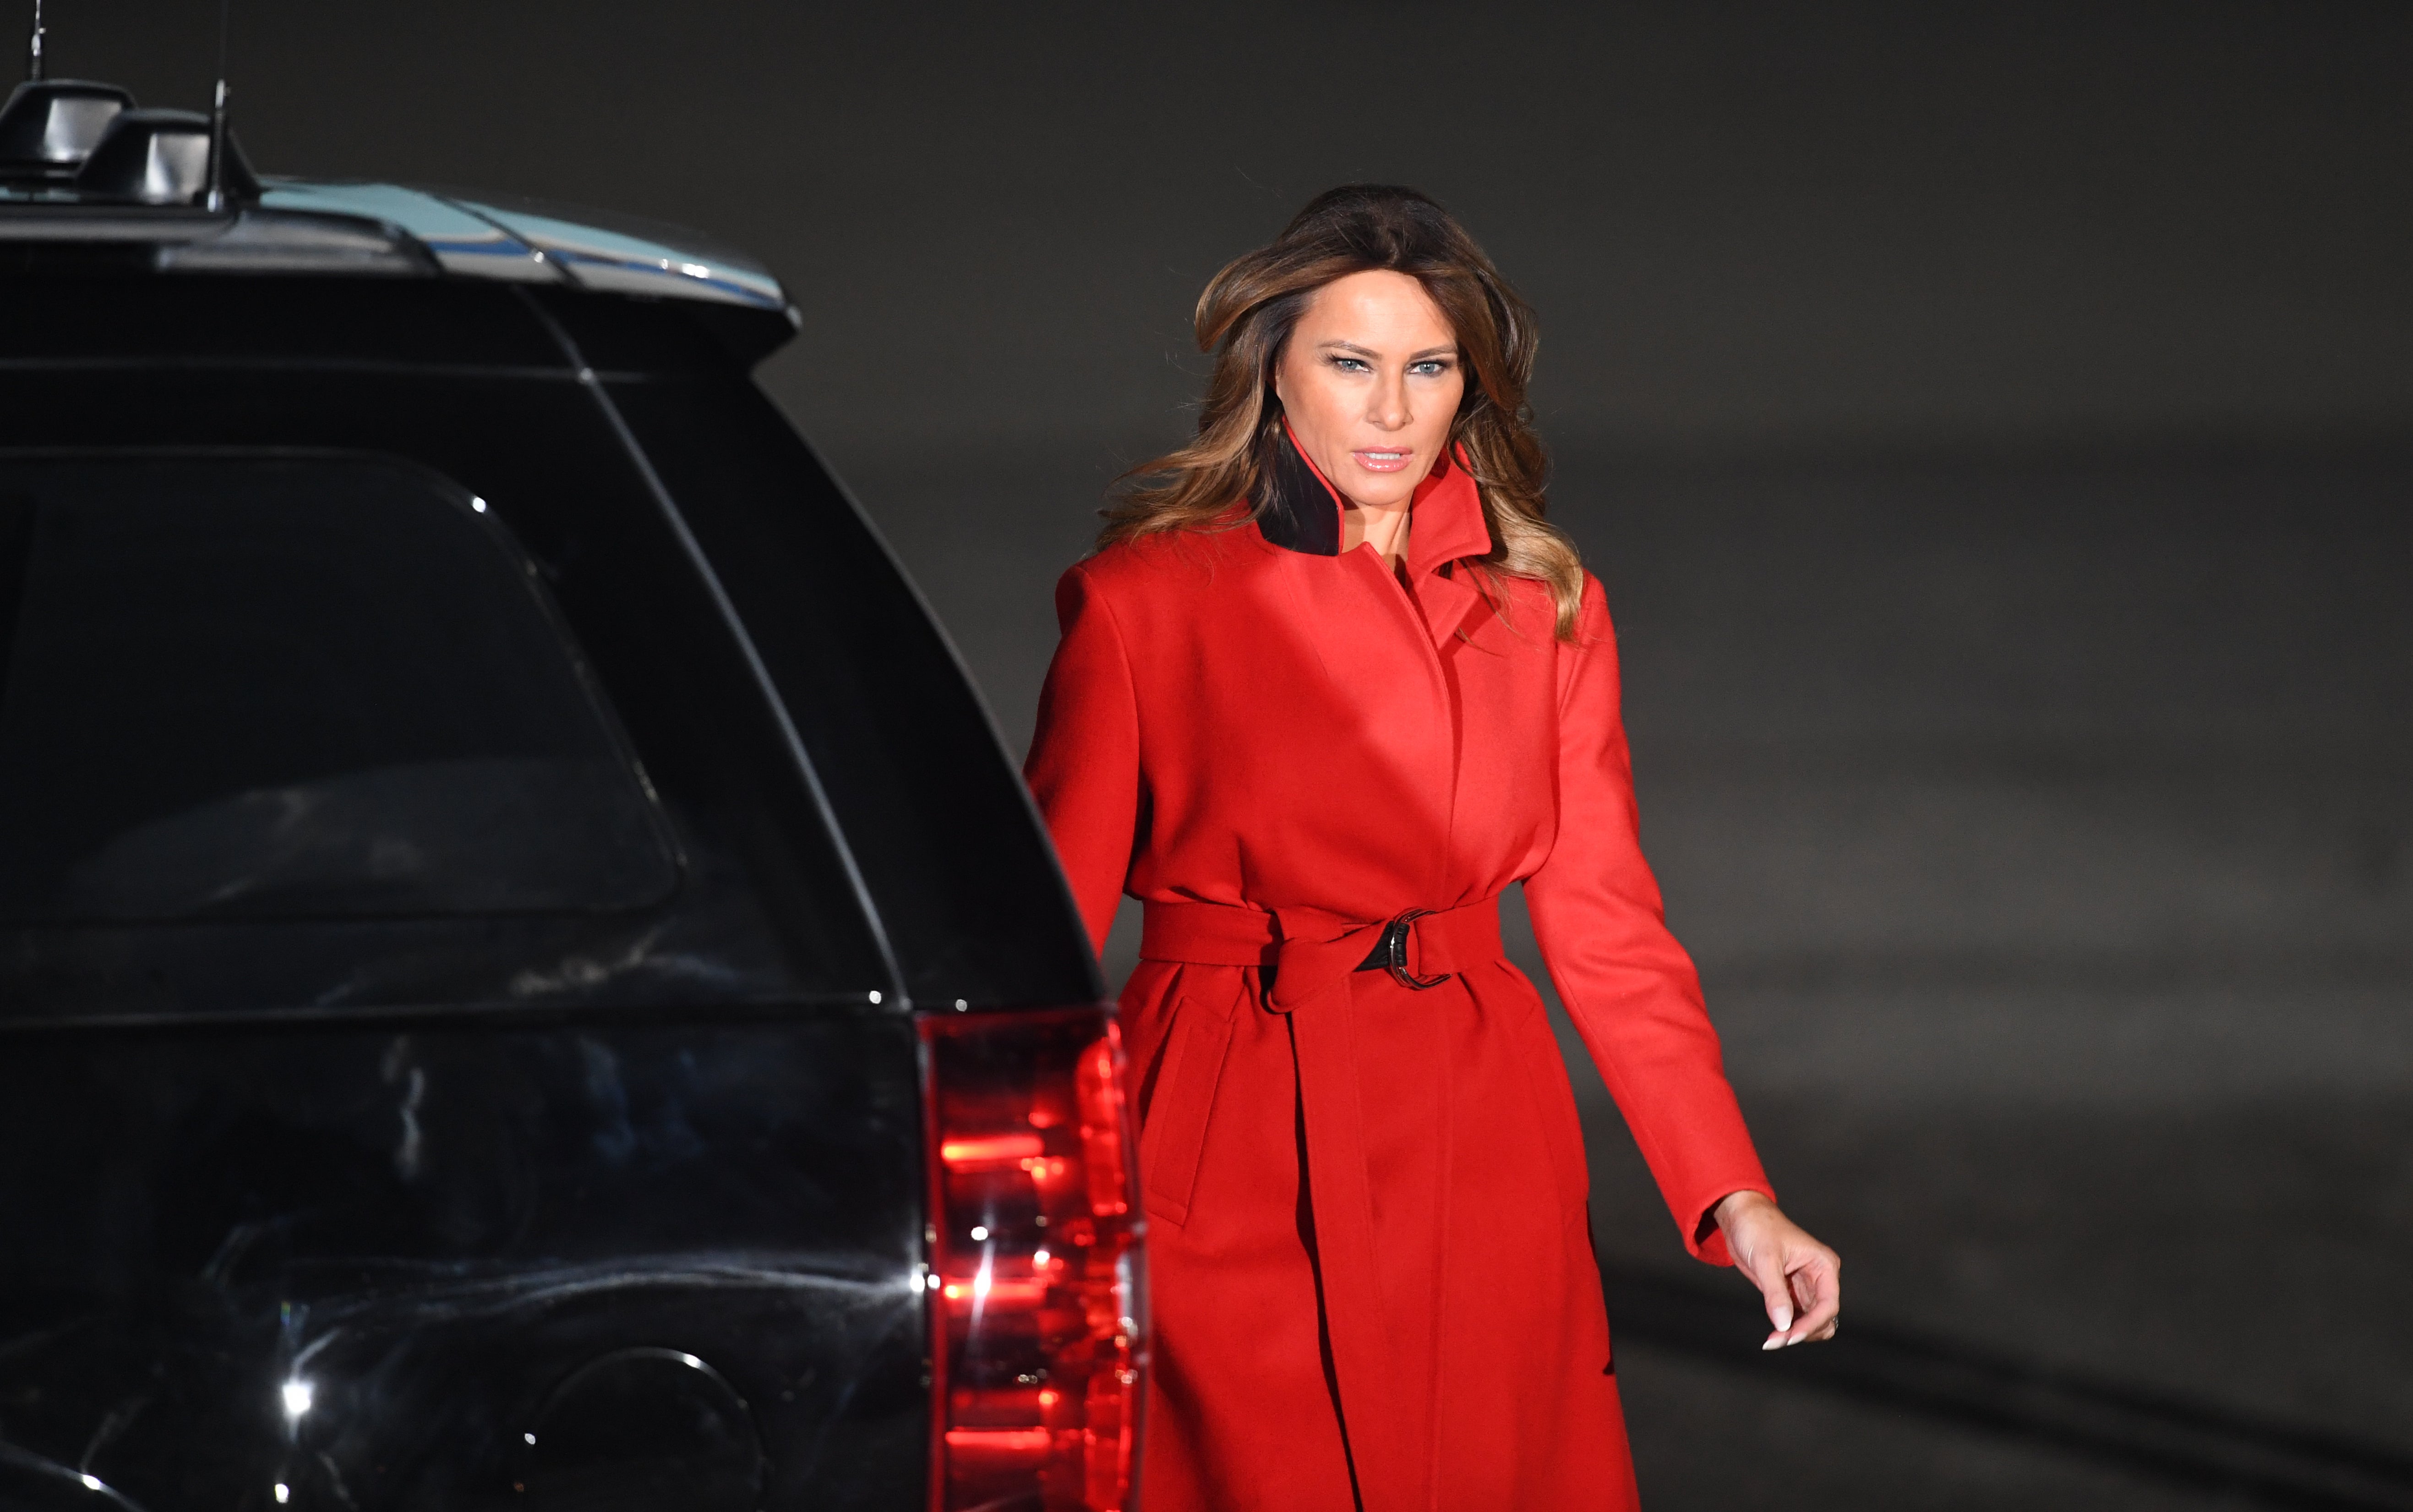 Melania Trump is also among the first ladies invited to Carter’s funeral